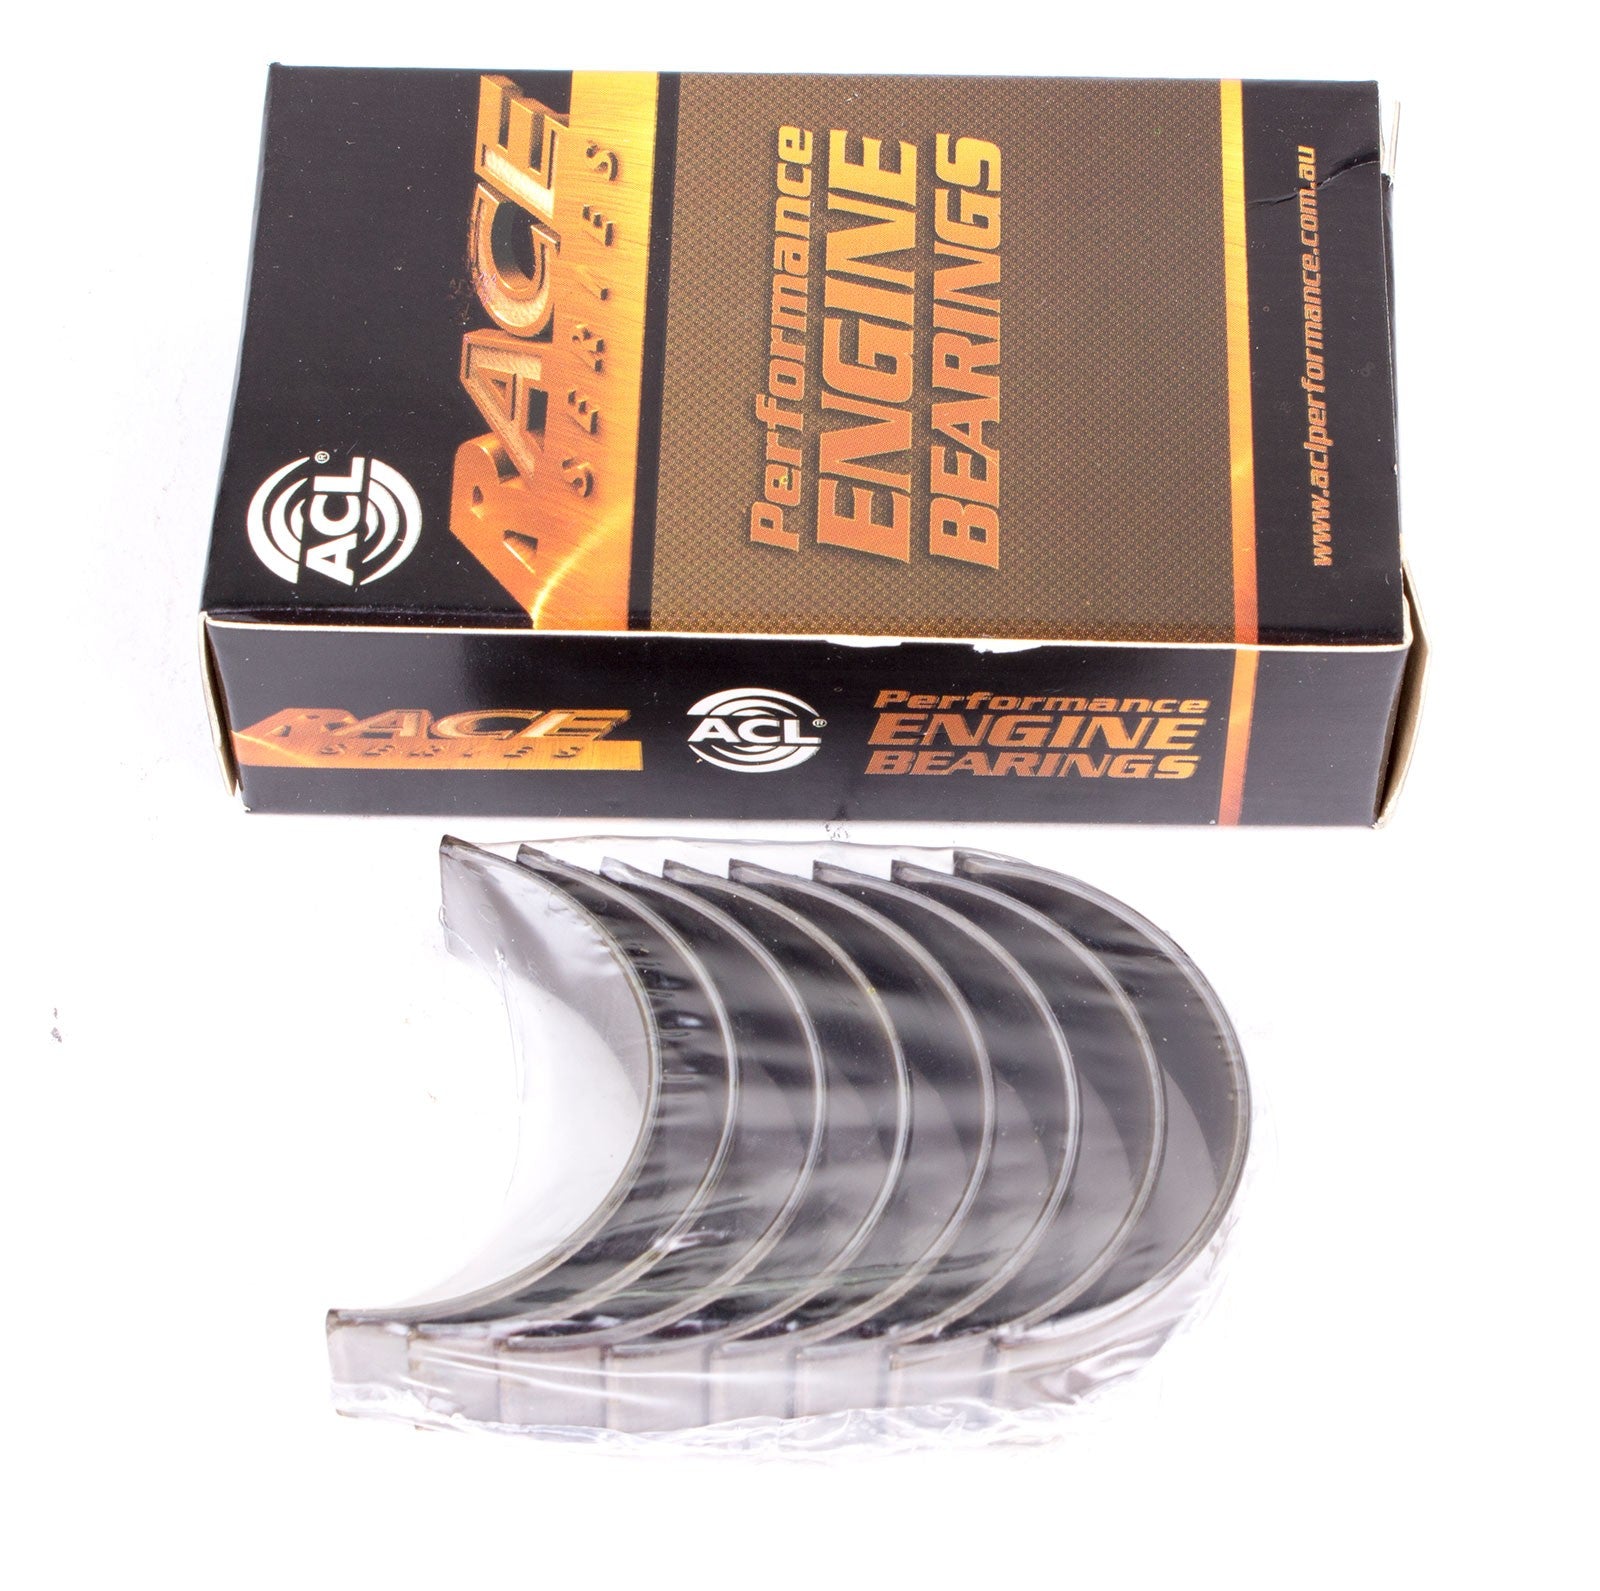 ACL 5M1432H-10 Main bearing set (ACL Race Series) Photo-0 